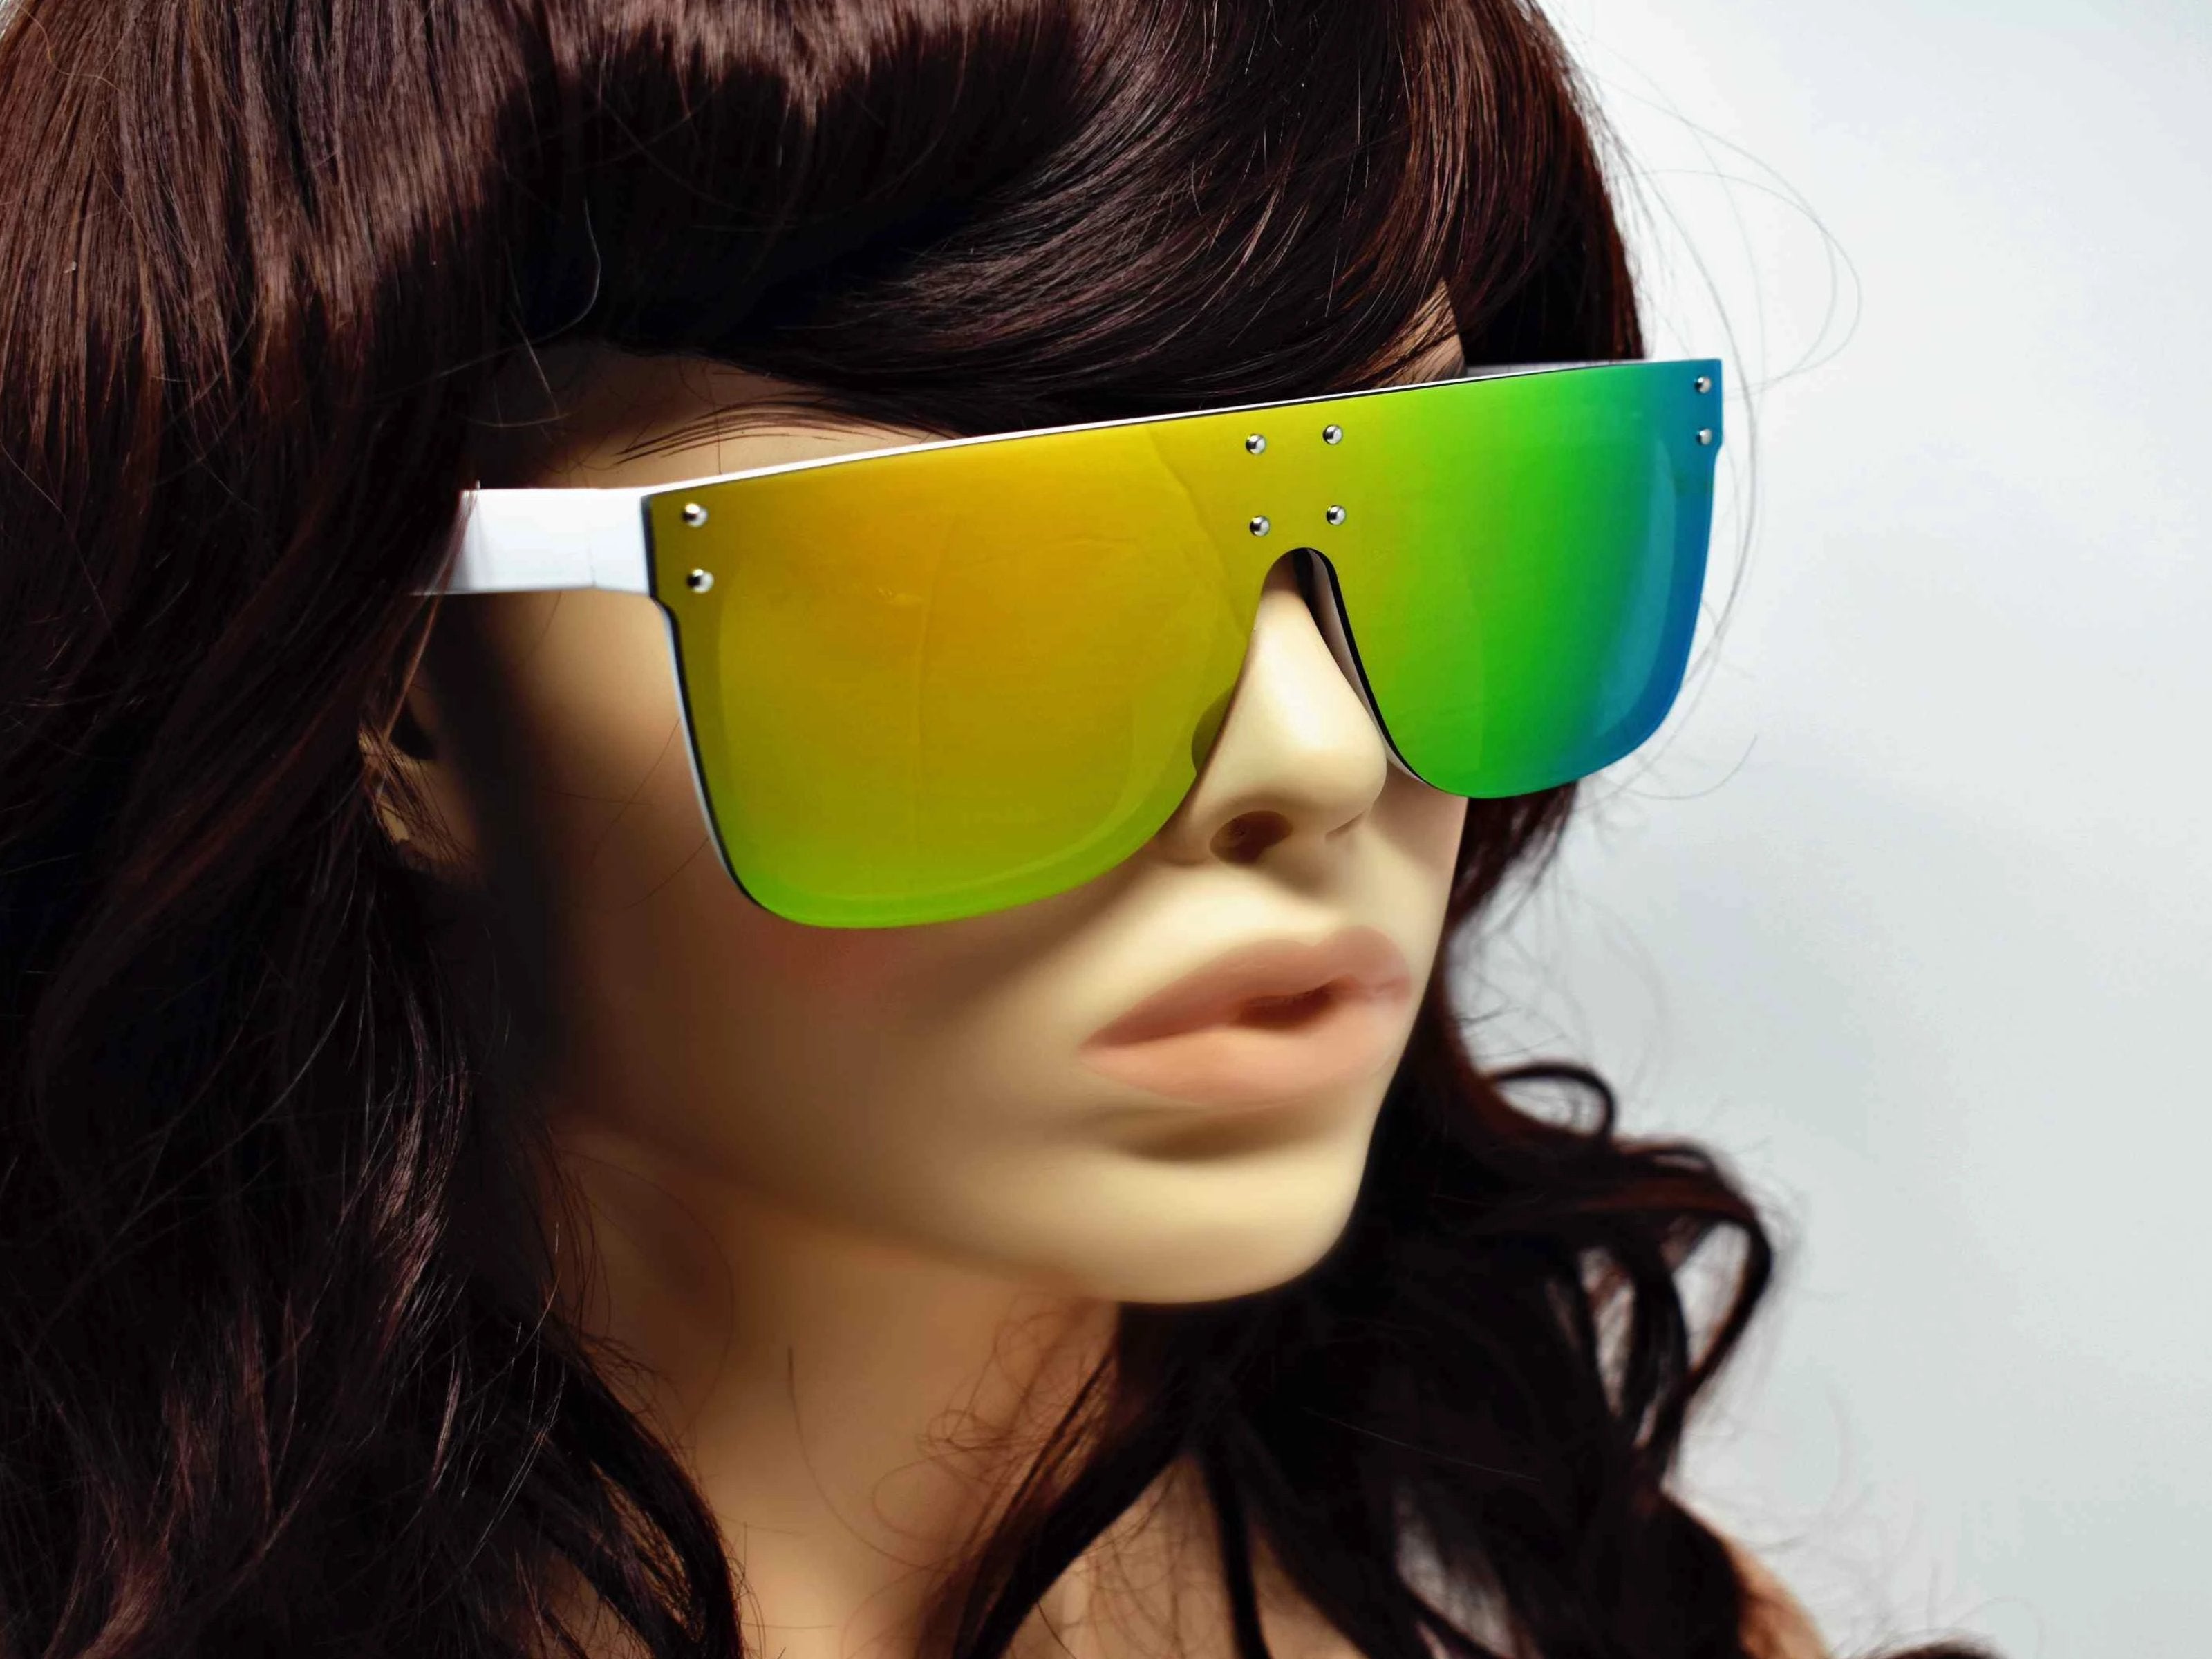 Fashion forward and edgy is what you call our shield shaped Rosa White framed two toned green mirrored lens Sunglasses.